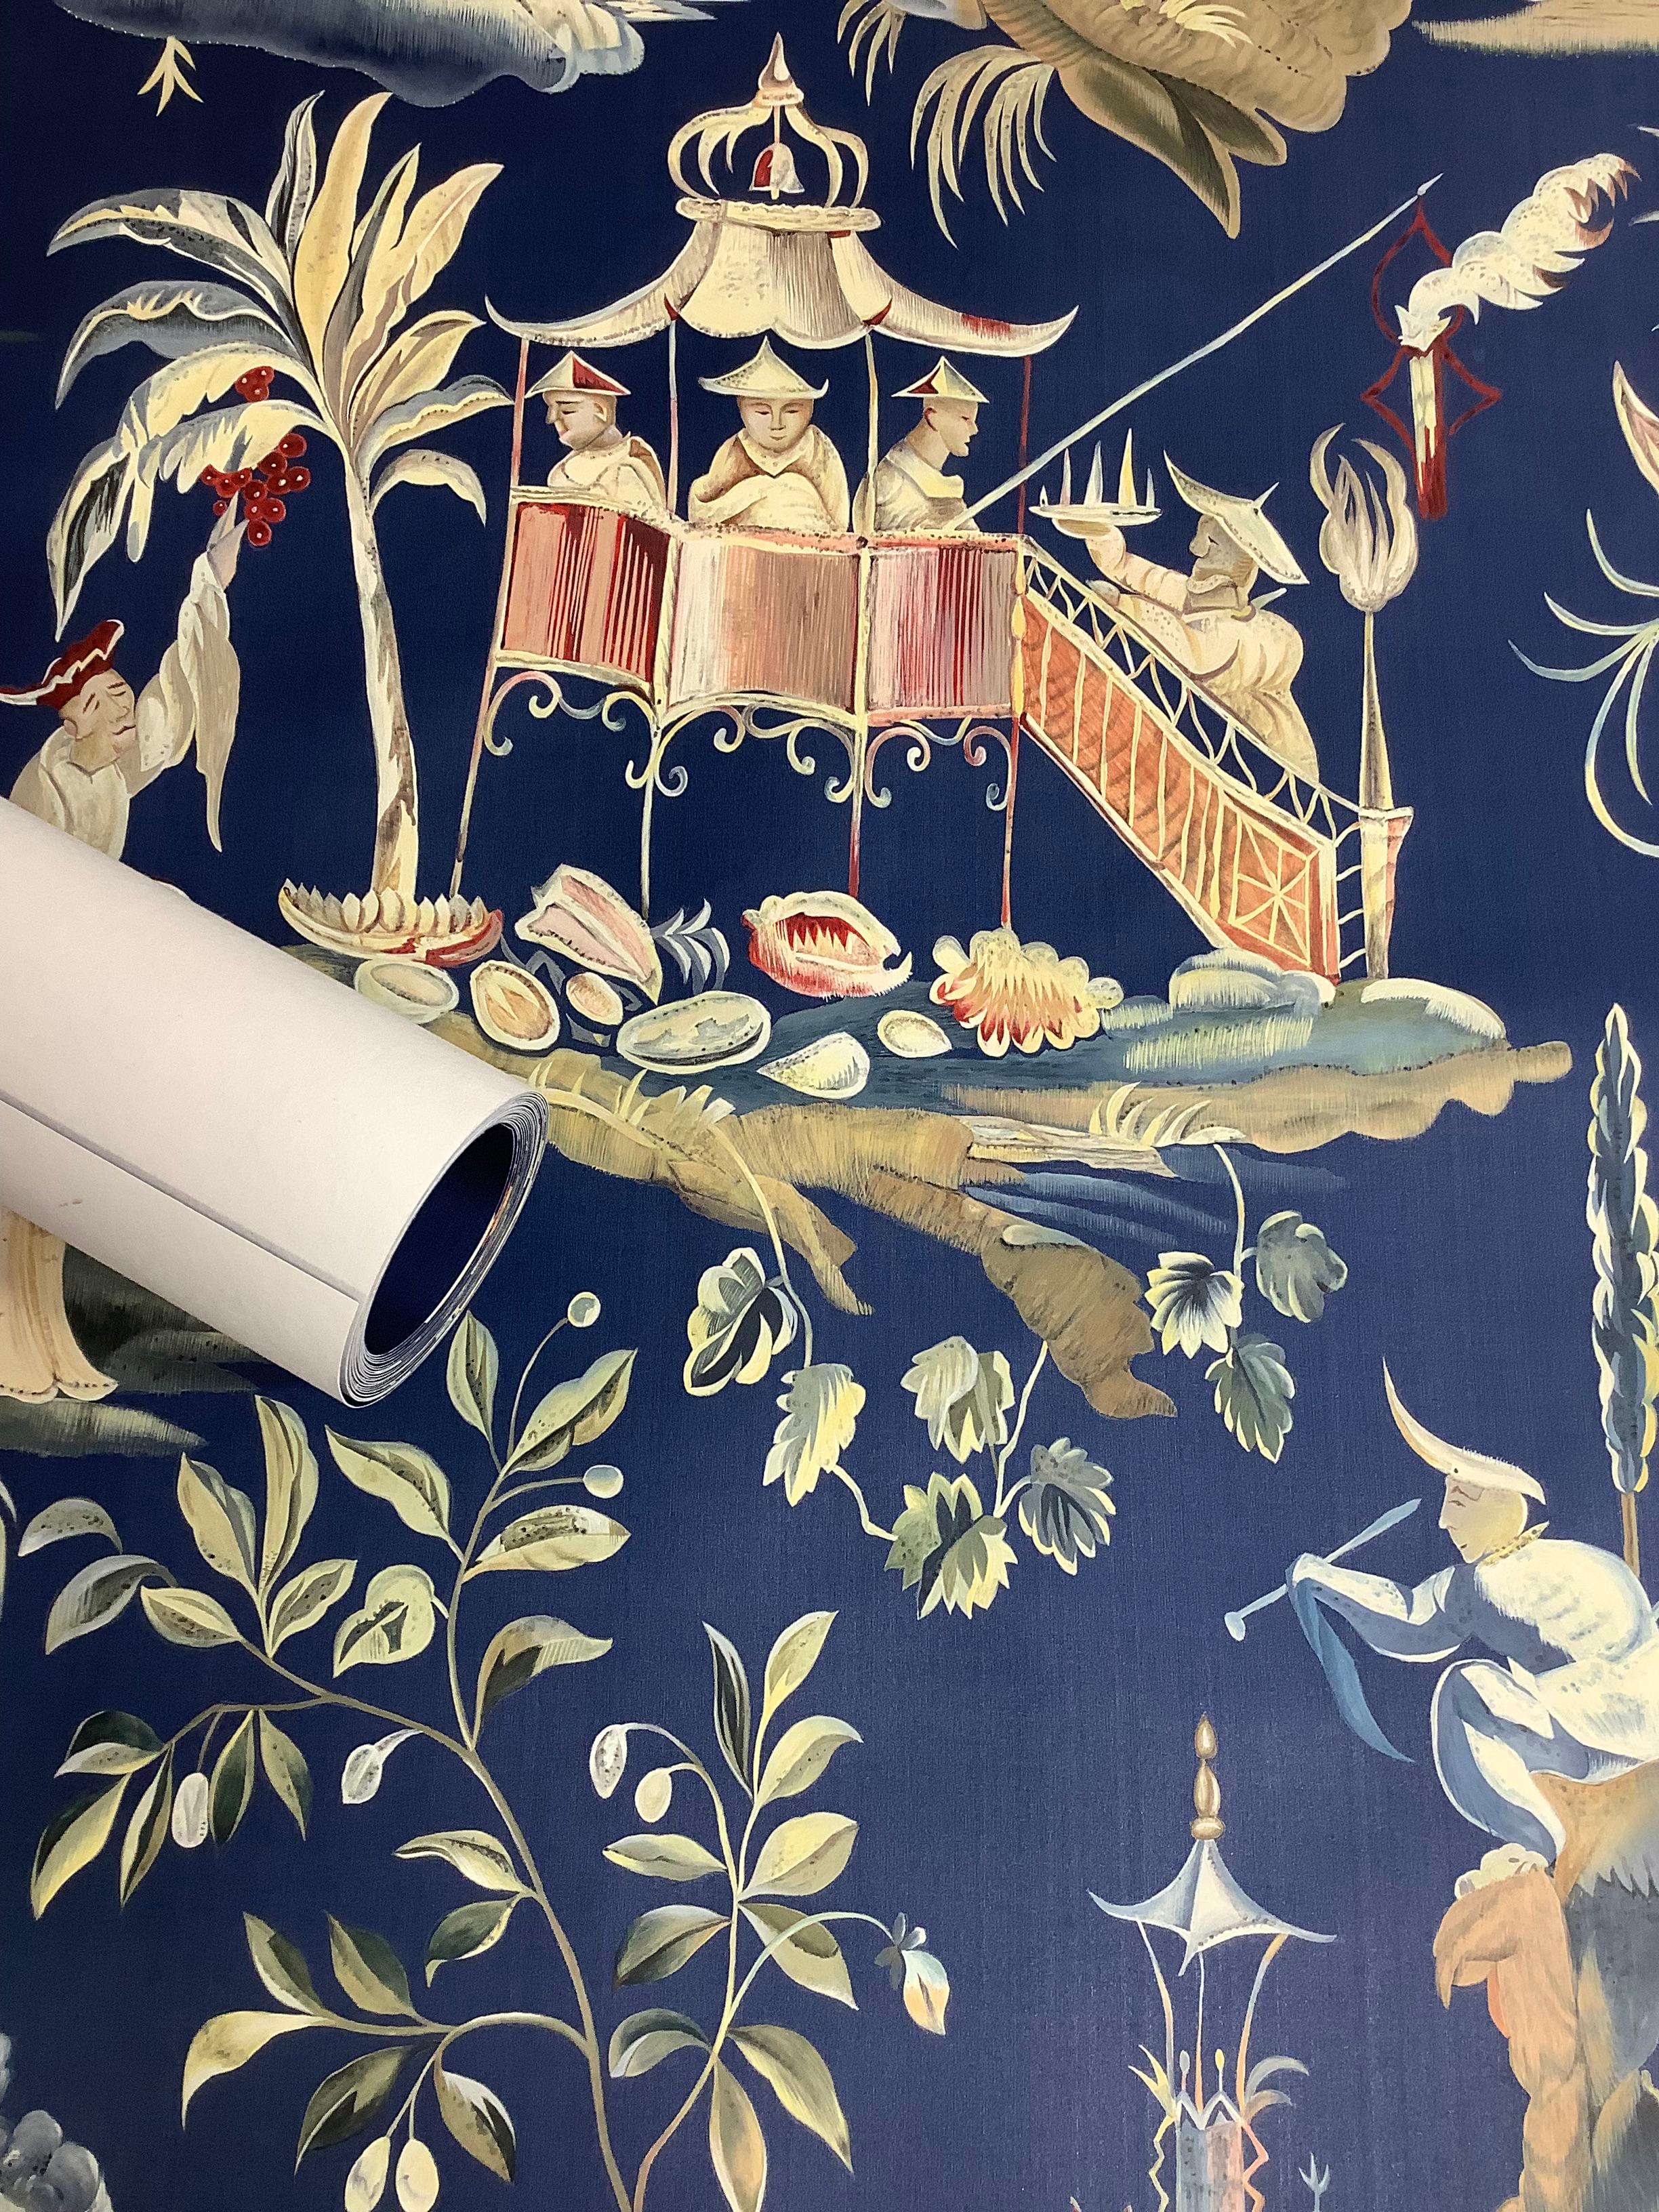 Hand-Painted Brussels Tapestry Wallpaper Mural For Sale